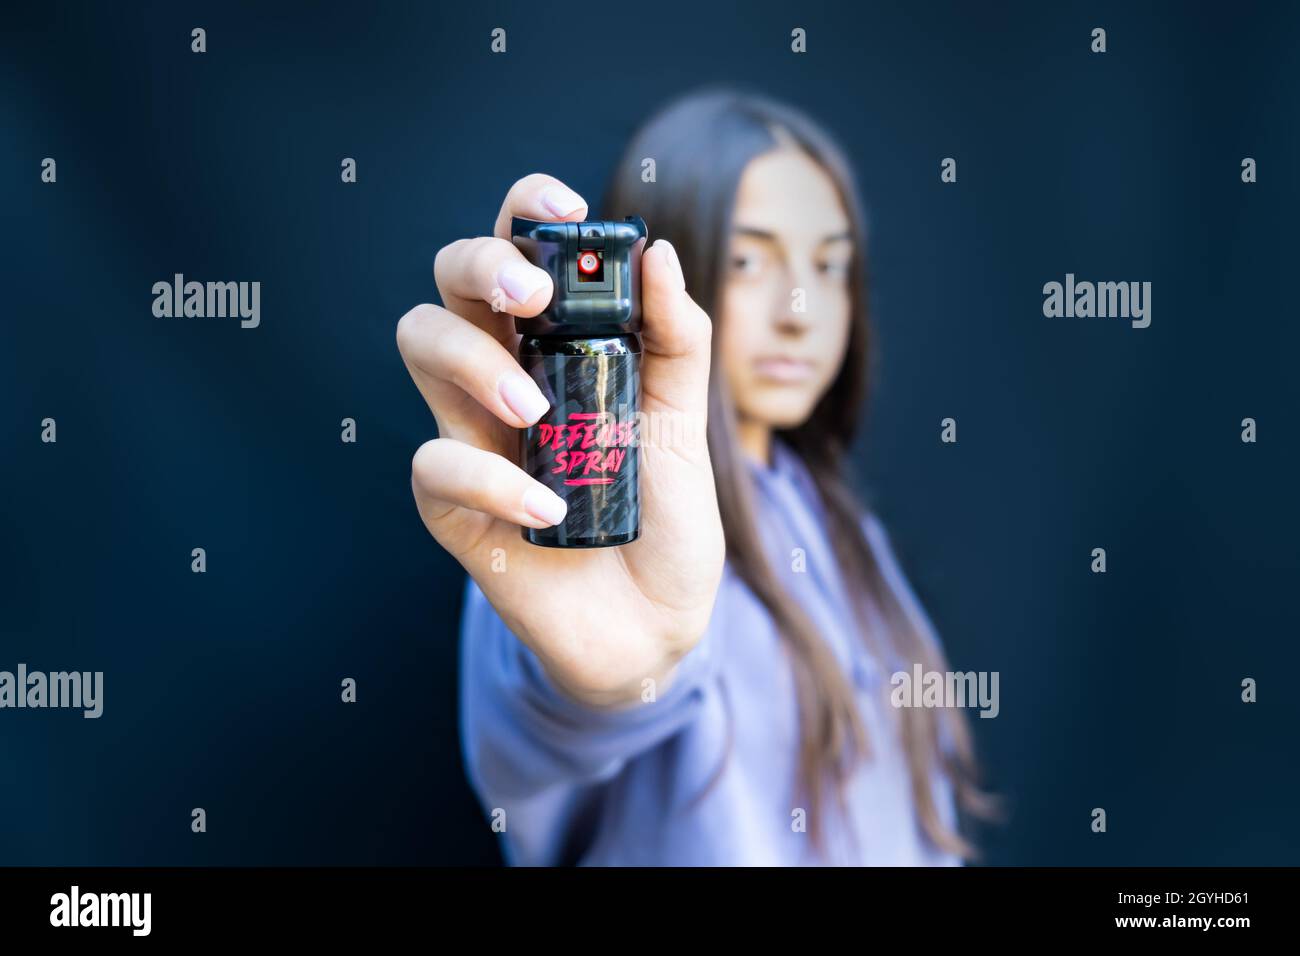 Self defence of young teenager girl with pepper spray. Isolated on dark background. Stock Photo